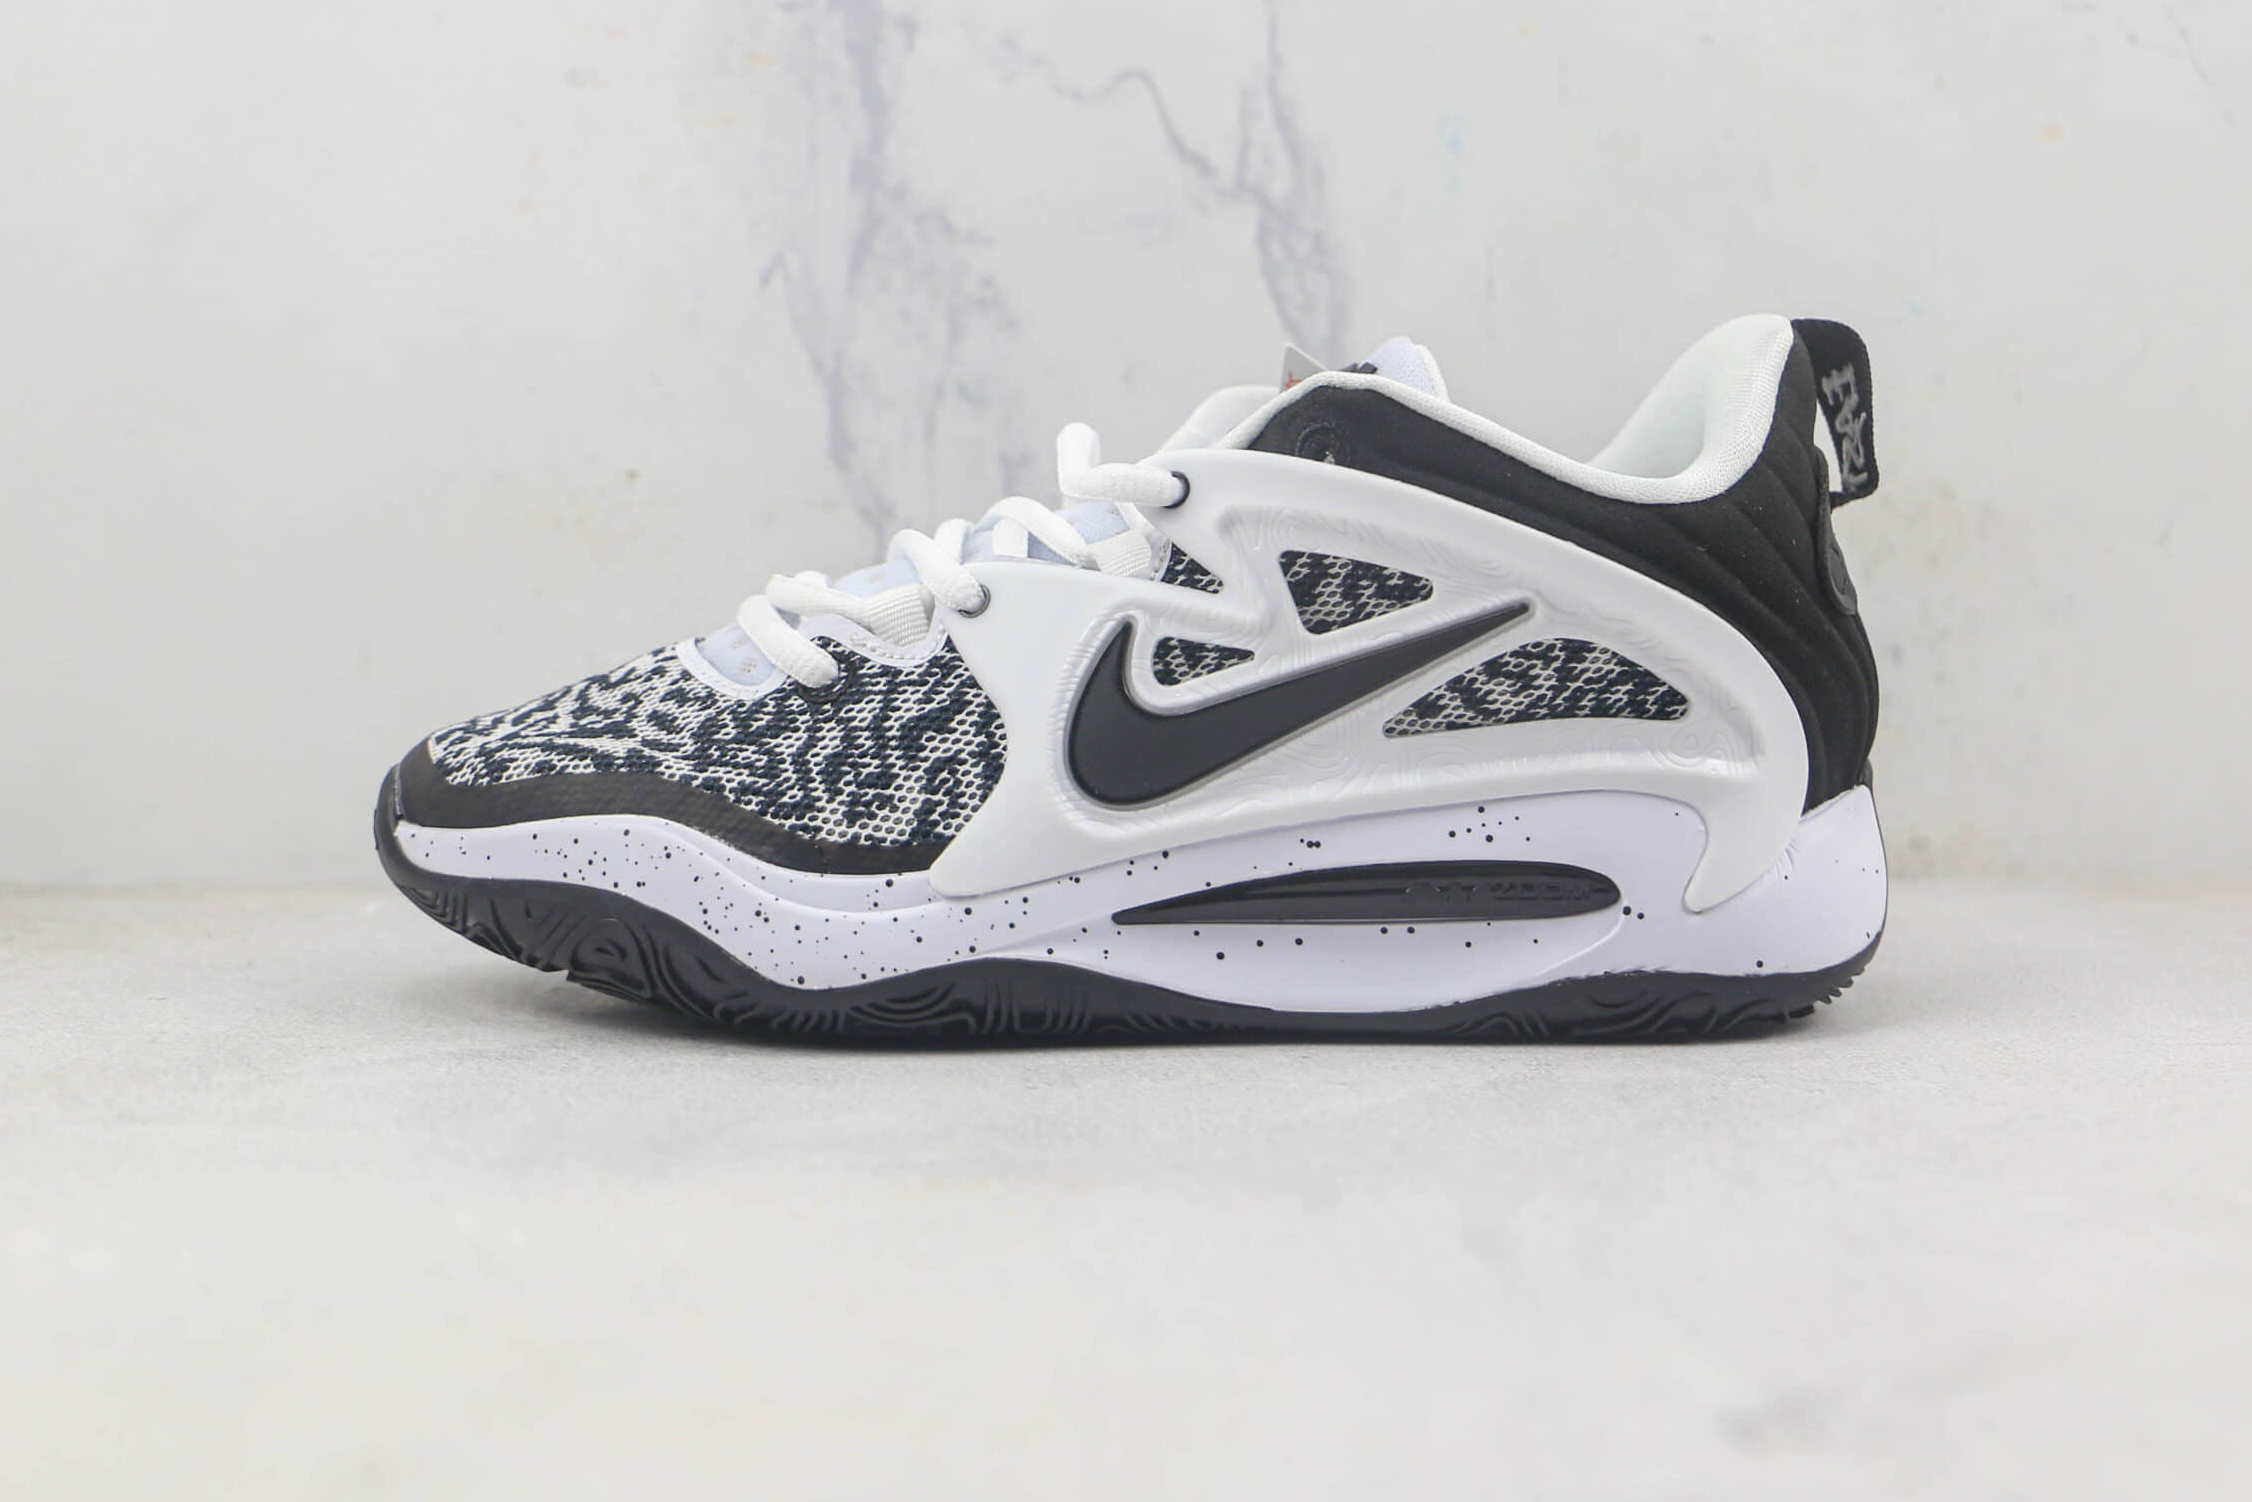 Nike KD 15 TB 'White Black Speckled' DO9826-100 | Limited Edition Basketball Shoes